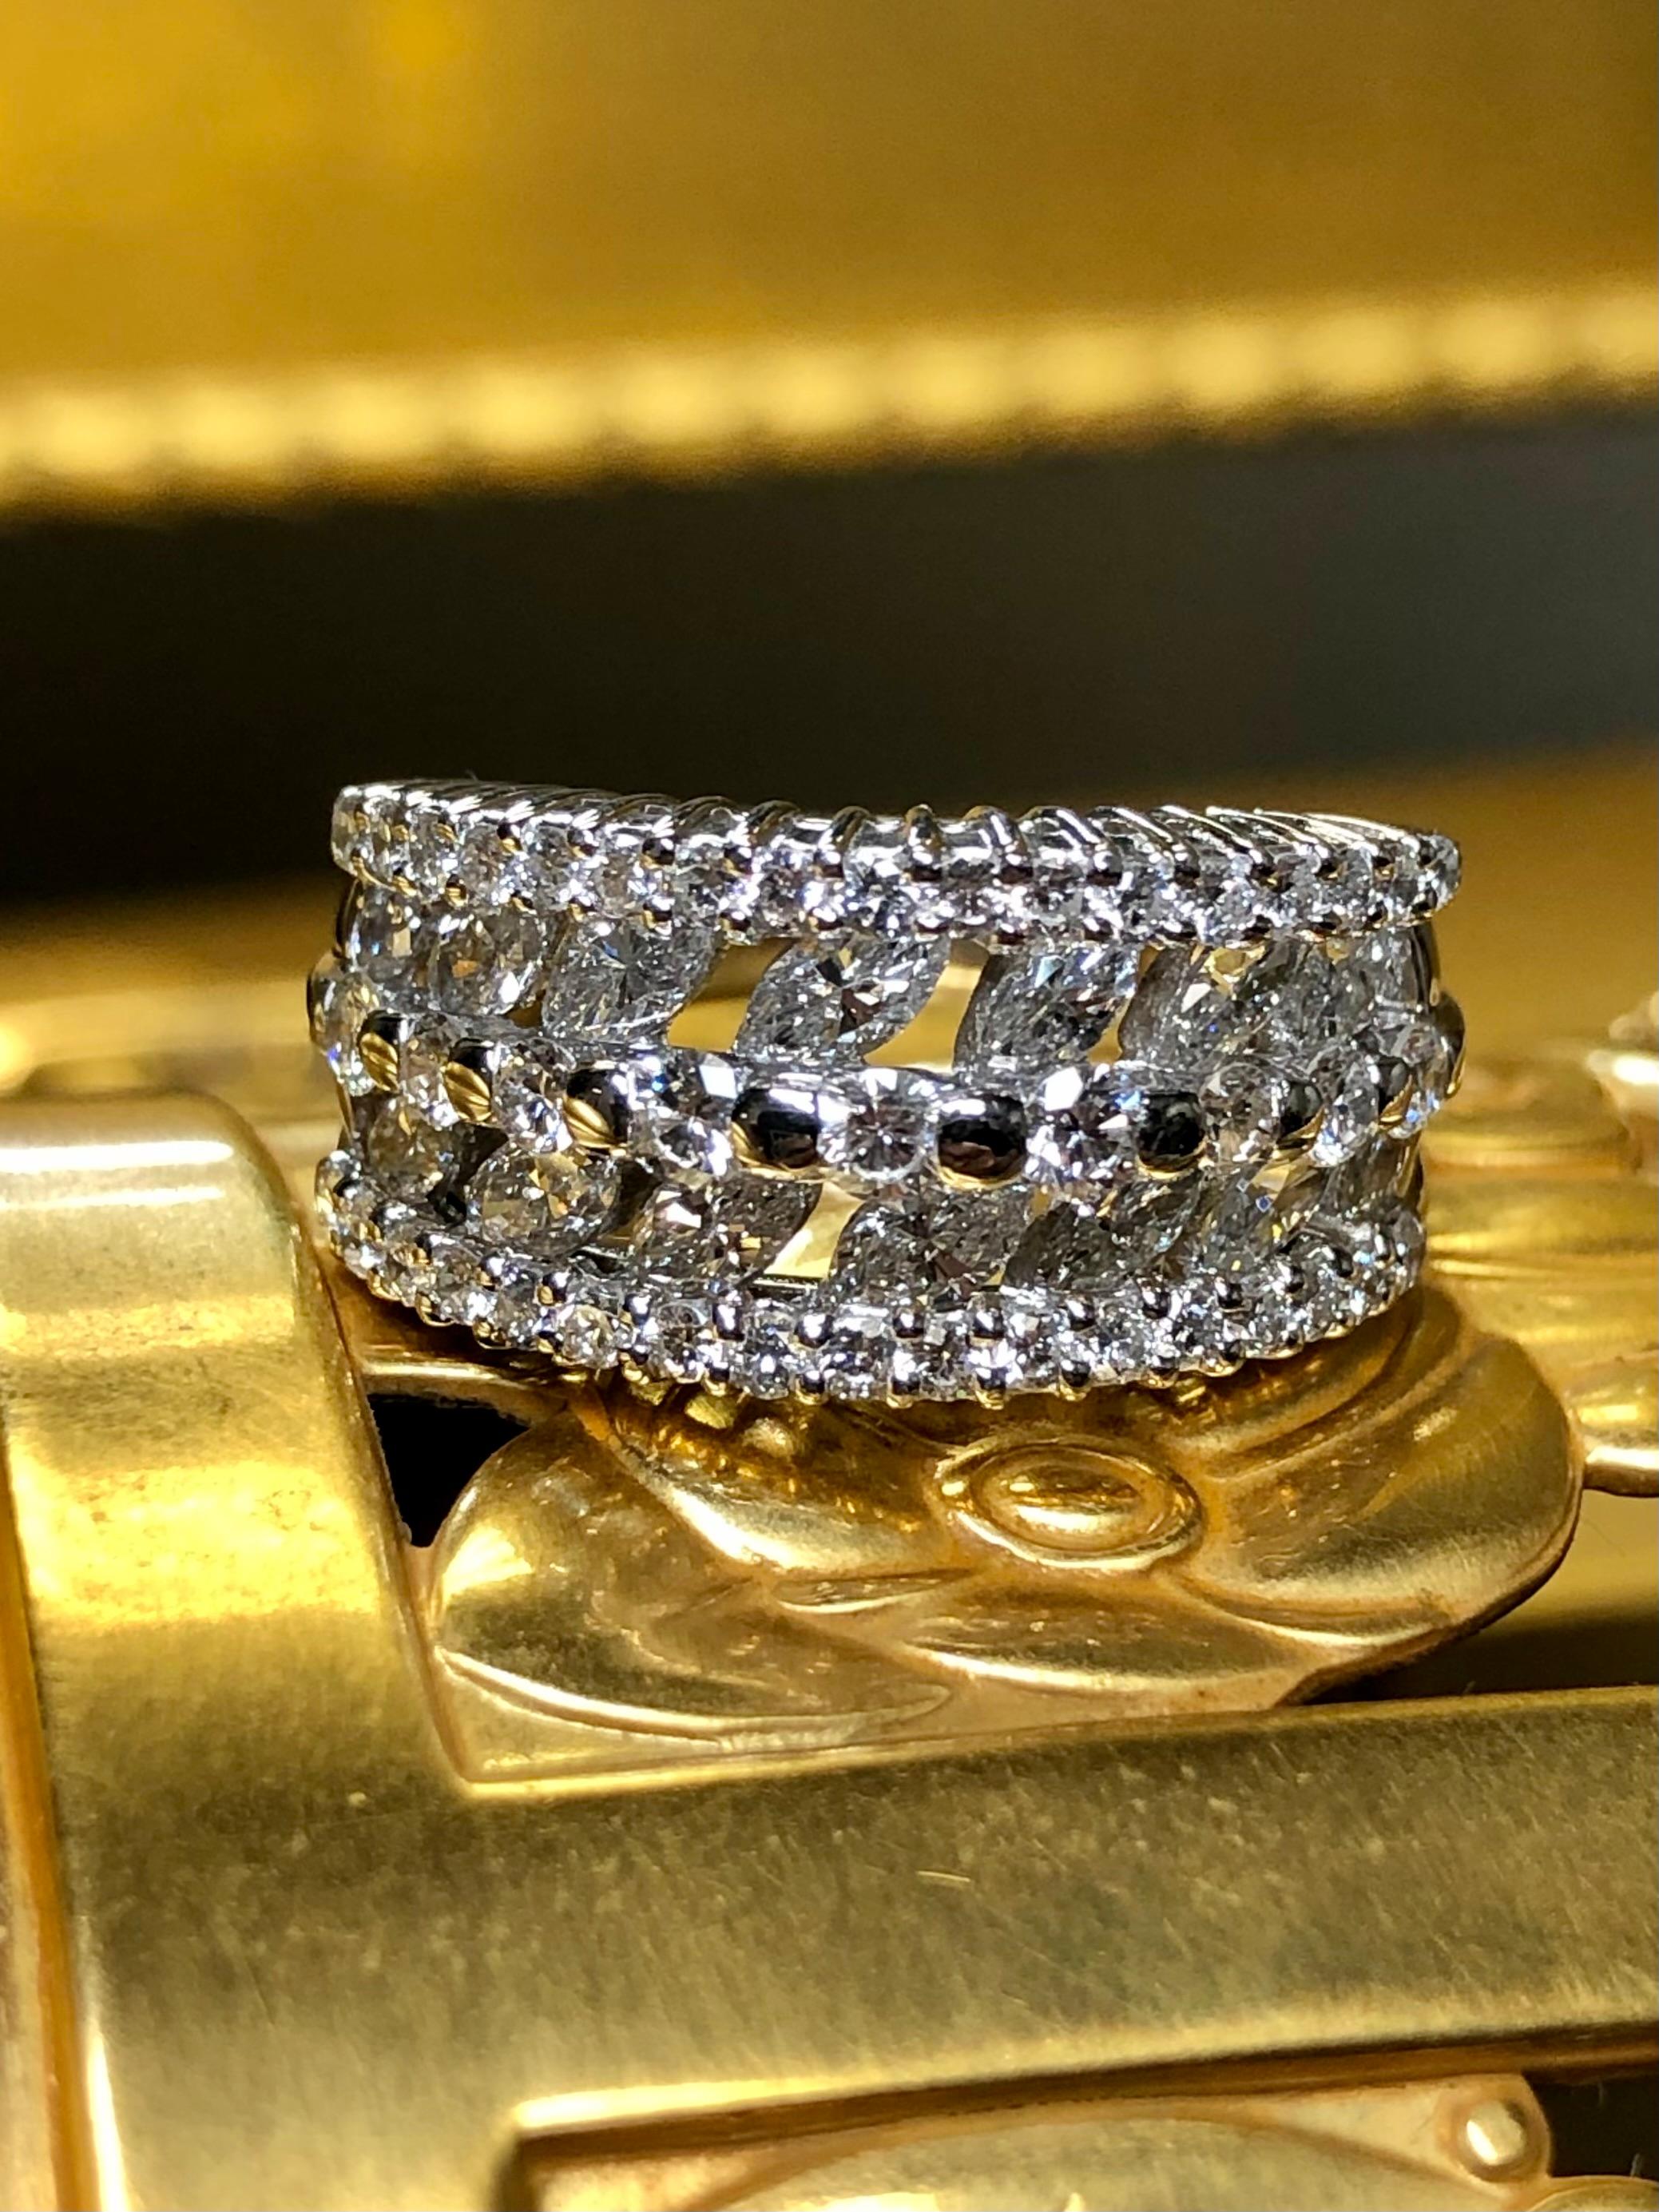 Not all band rings have a presence, but this one most certainly does. Crafted in platinum, this ring has been set with approximately 2cttw in G-I color Vs1-2 clarity round and marquise diamonds in a prong and tension setting. Nicely made and